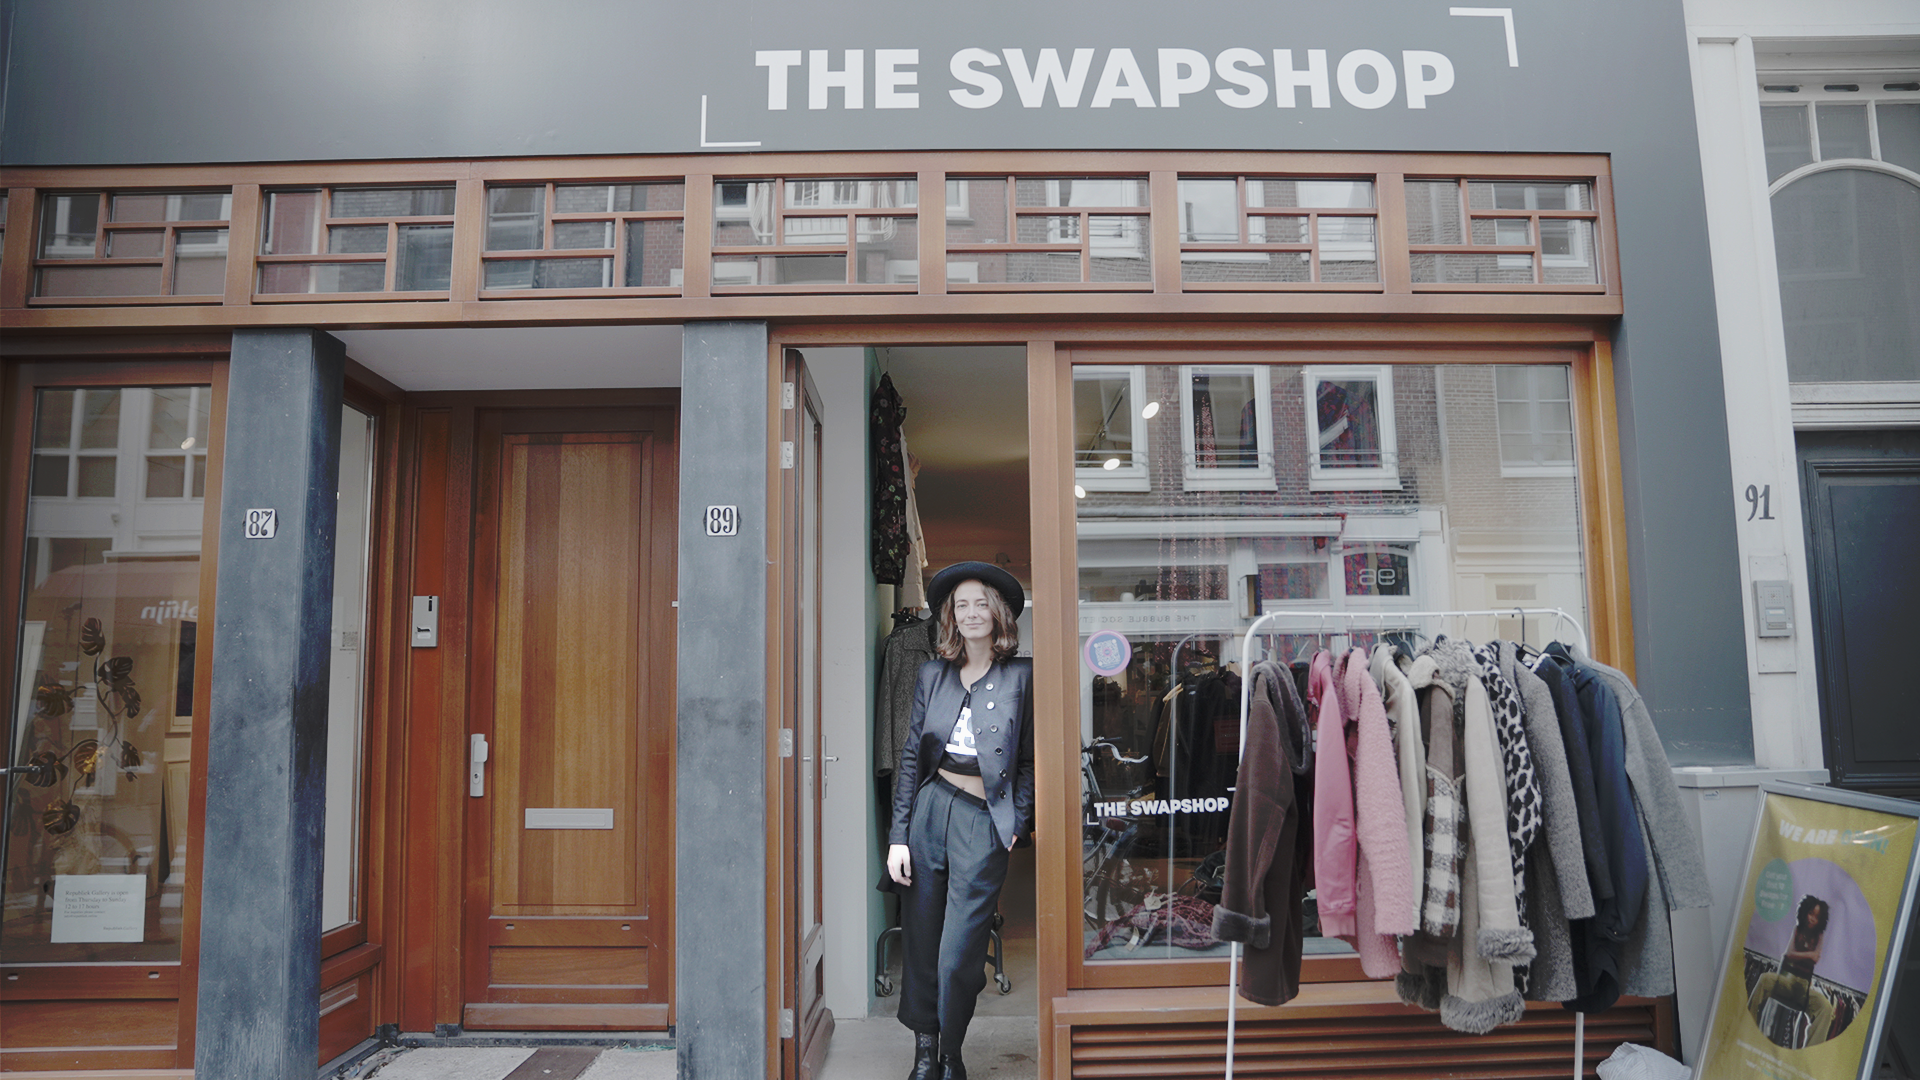 A clothes swapshop in Amsterdam (